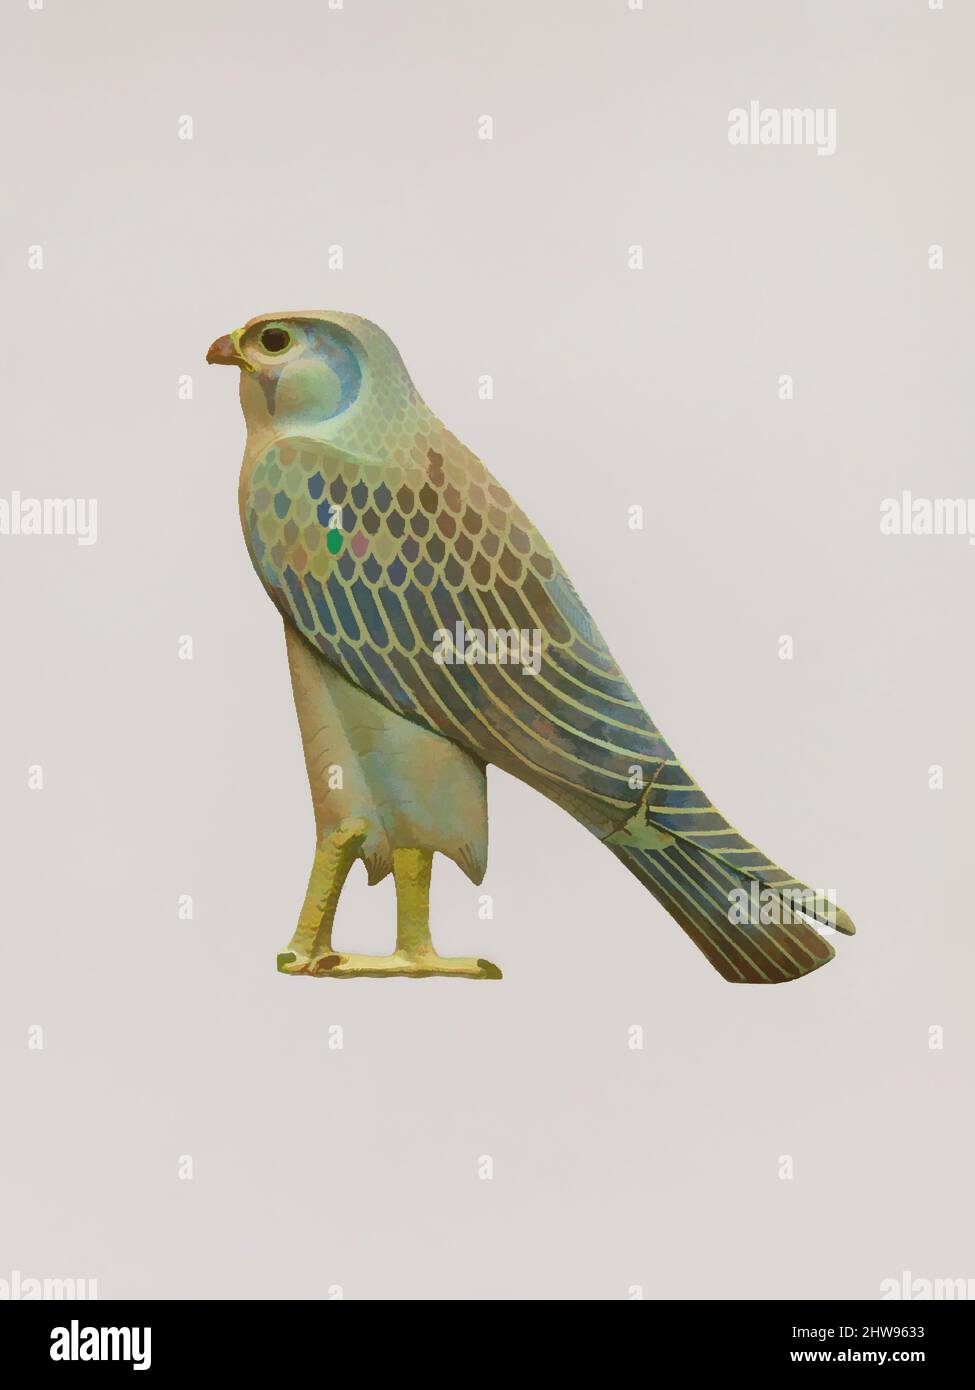 Art inspired by Inlay in the form of the Horus falcon, Late Period–Ptolemaic Period, 4th century B.C., From Egypt; Possibly from Middle Egypt, Hermopolis (Ashmunein; Khemenu), Faience, H. 16 cm (6 5/16 in.); W. 1.2 cm (1/2 in.); L. 15.5 cm (6 1/8 in.), This inlay represents the falcon, Classic works modernized by Artotop with a splash of modernity. Shapes, color and value, eye-catching visual impact on art. Emotions through freedom of artworks in a contemporary way. A timeless message pursuing a wildly creative new direction. Artists turning to the digital medium and creating the Artotop NFT Stock Photo